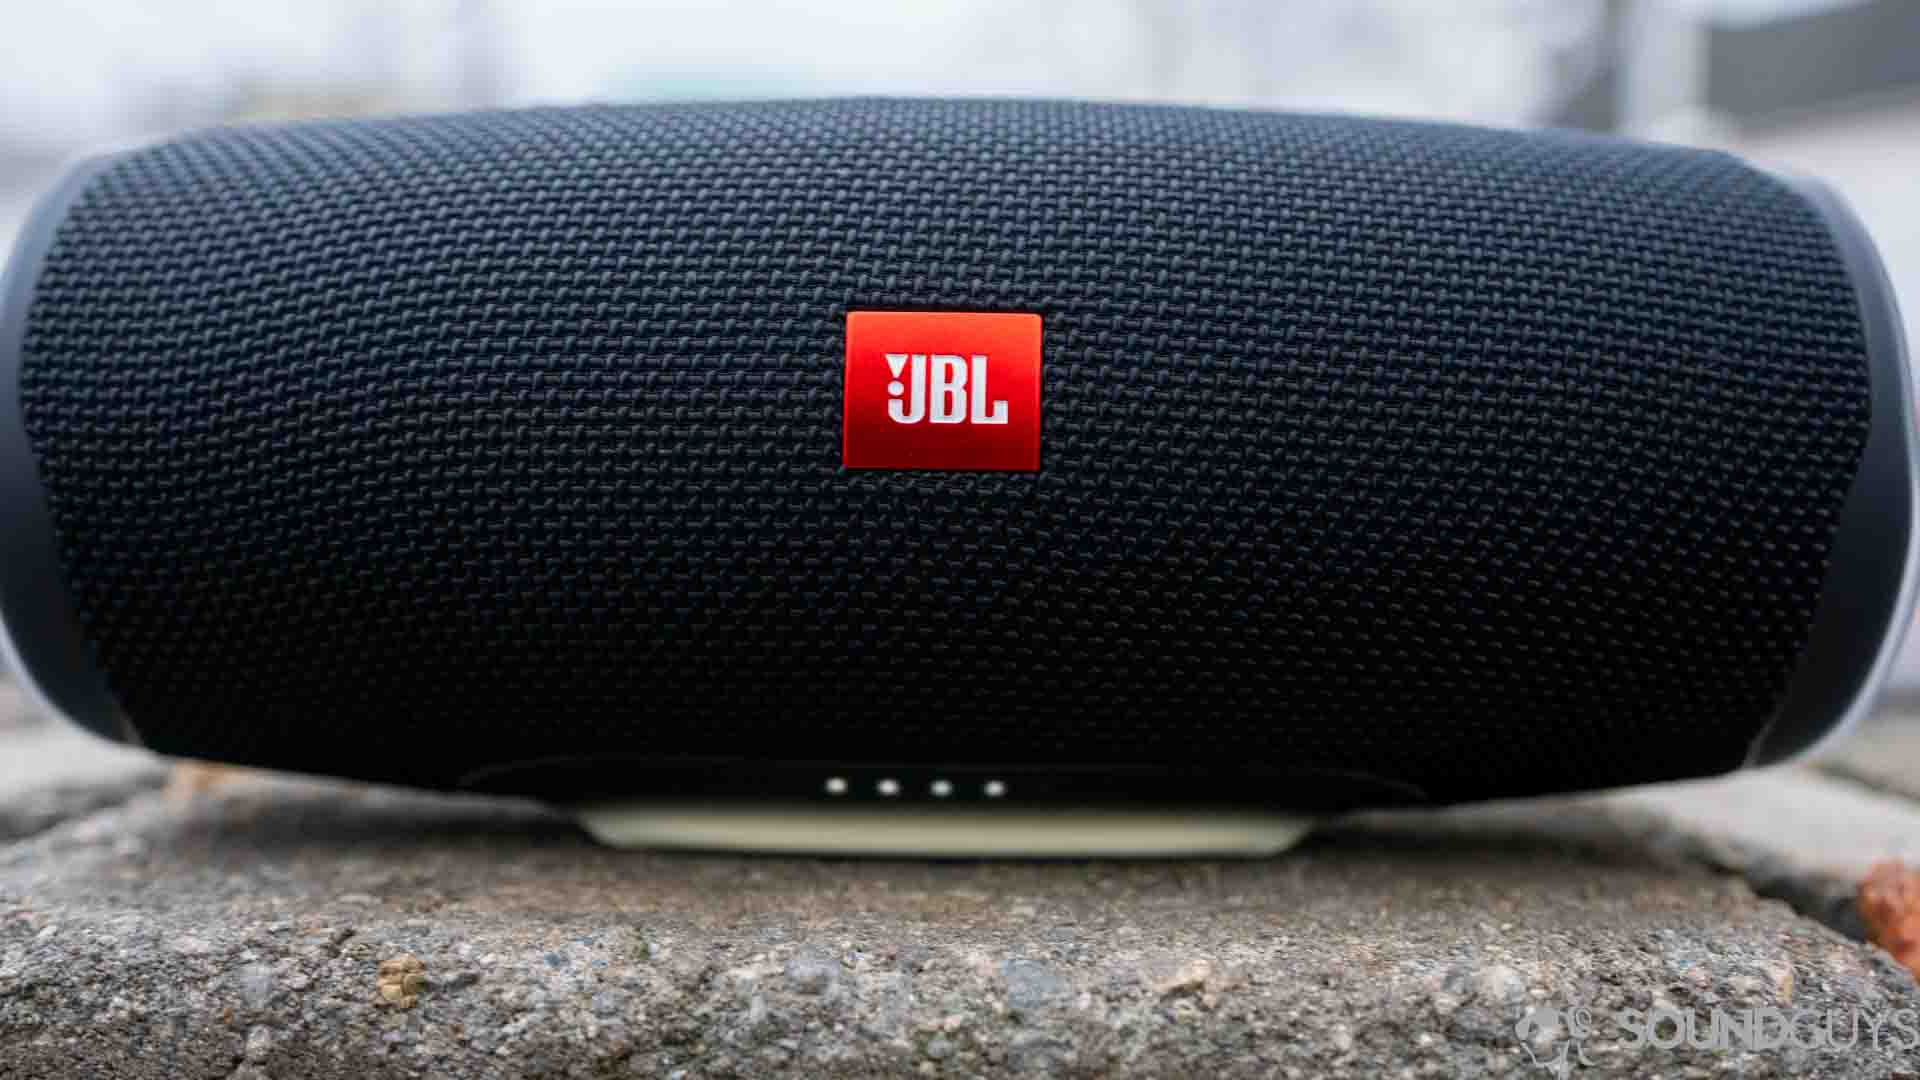 Pictured are the battery indicator lights of the JBL Charge 4.